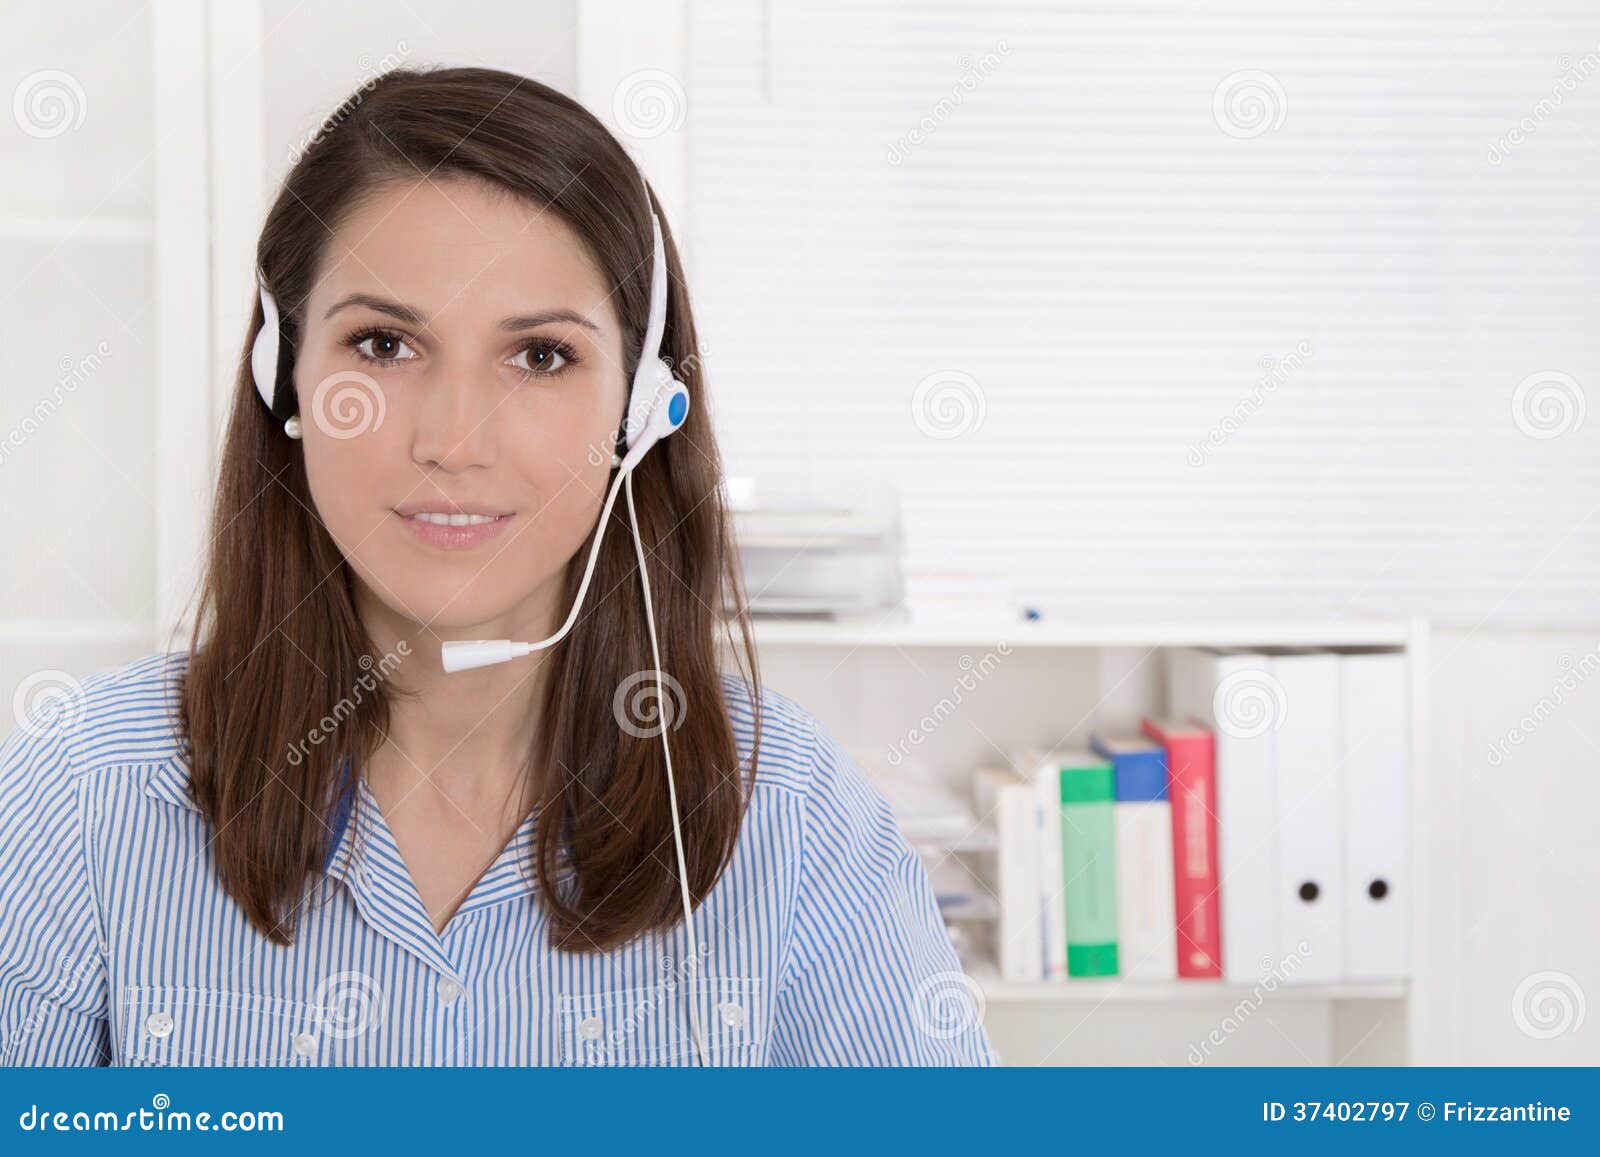 telesales or helpdesk - helpful woman with headset smiling at ca